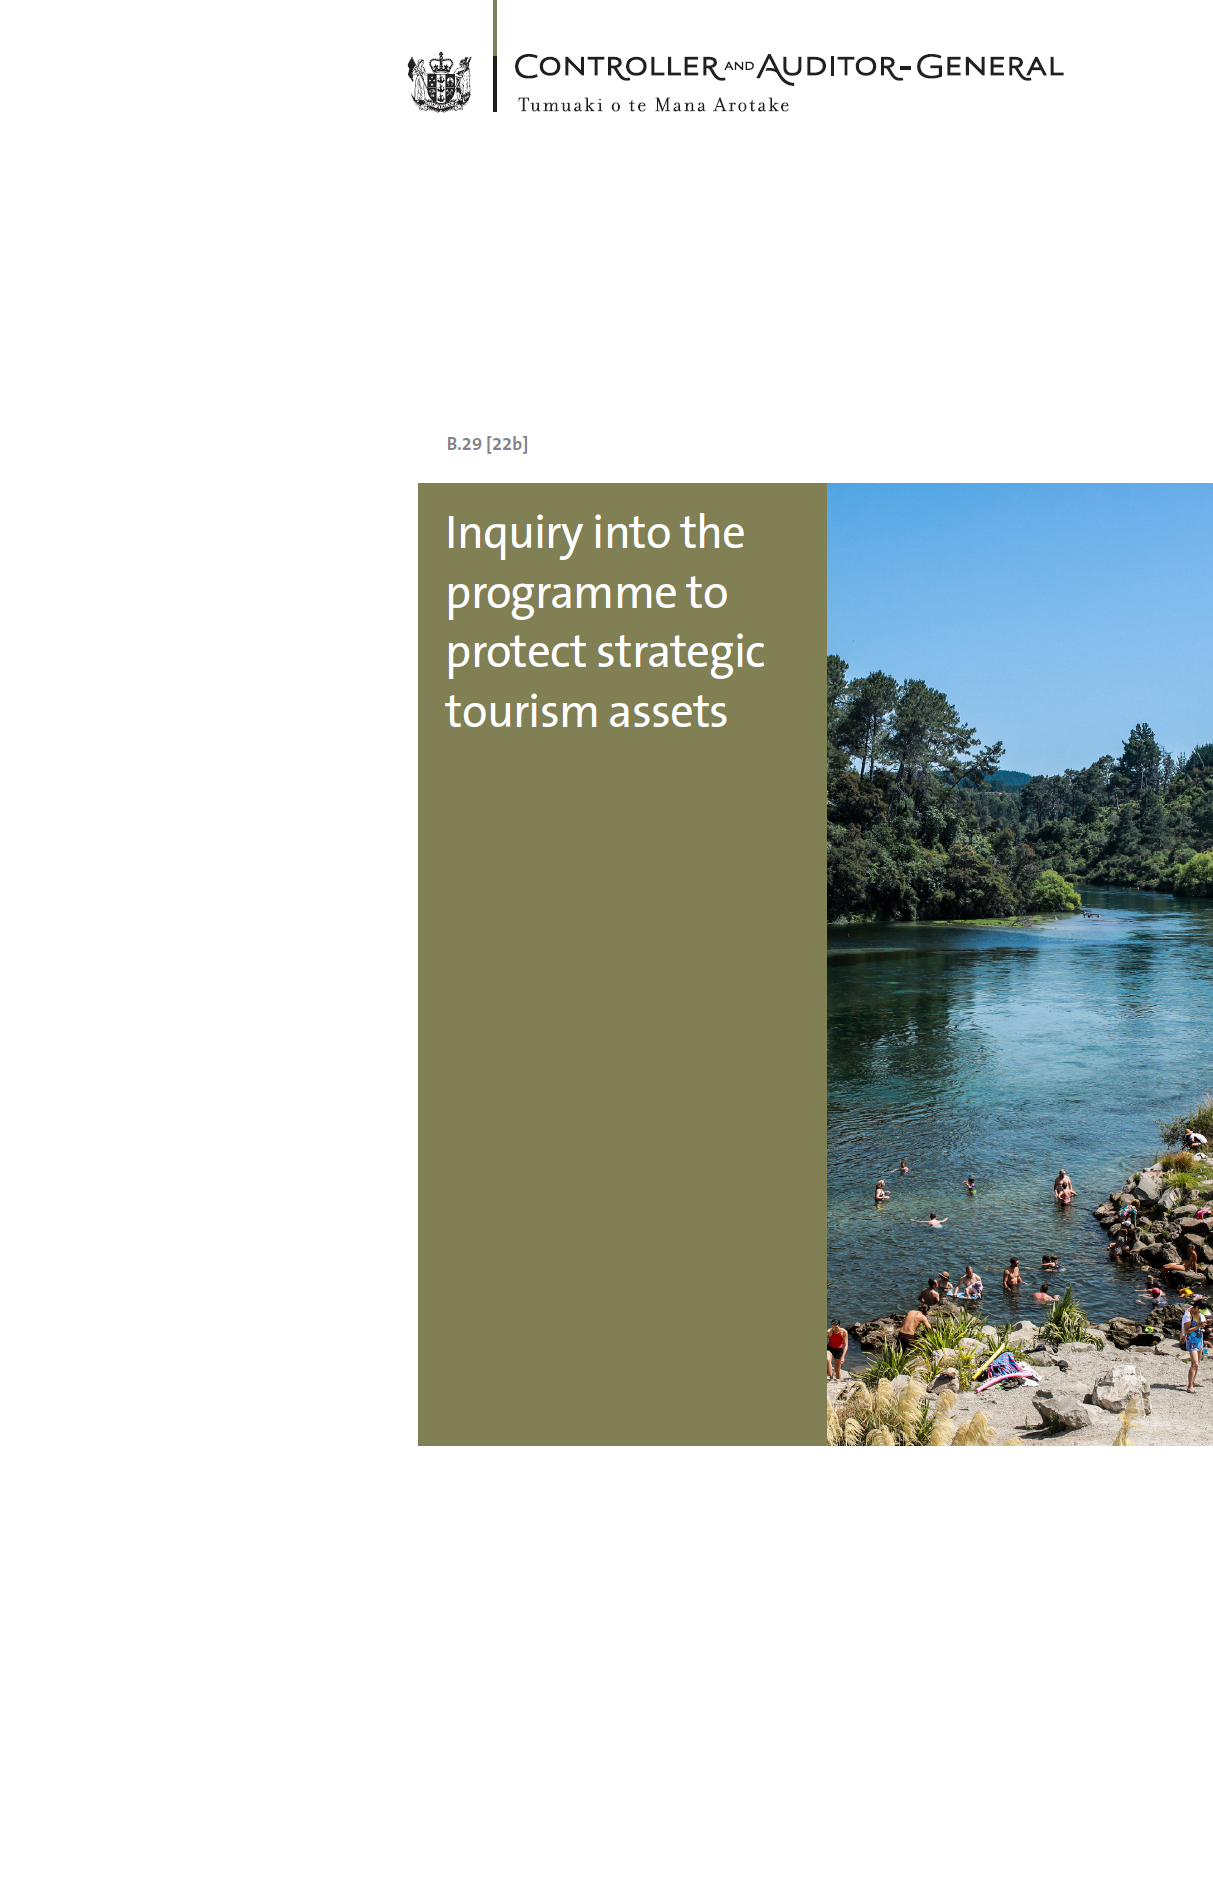 Report cover of Inquiry into the Strategic Tourism Assets Protection Programme